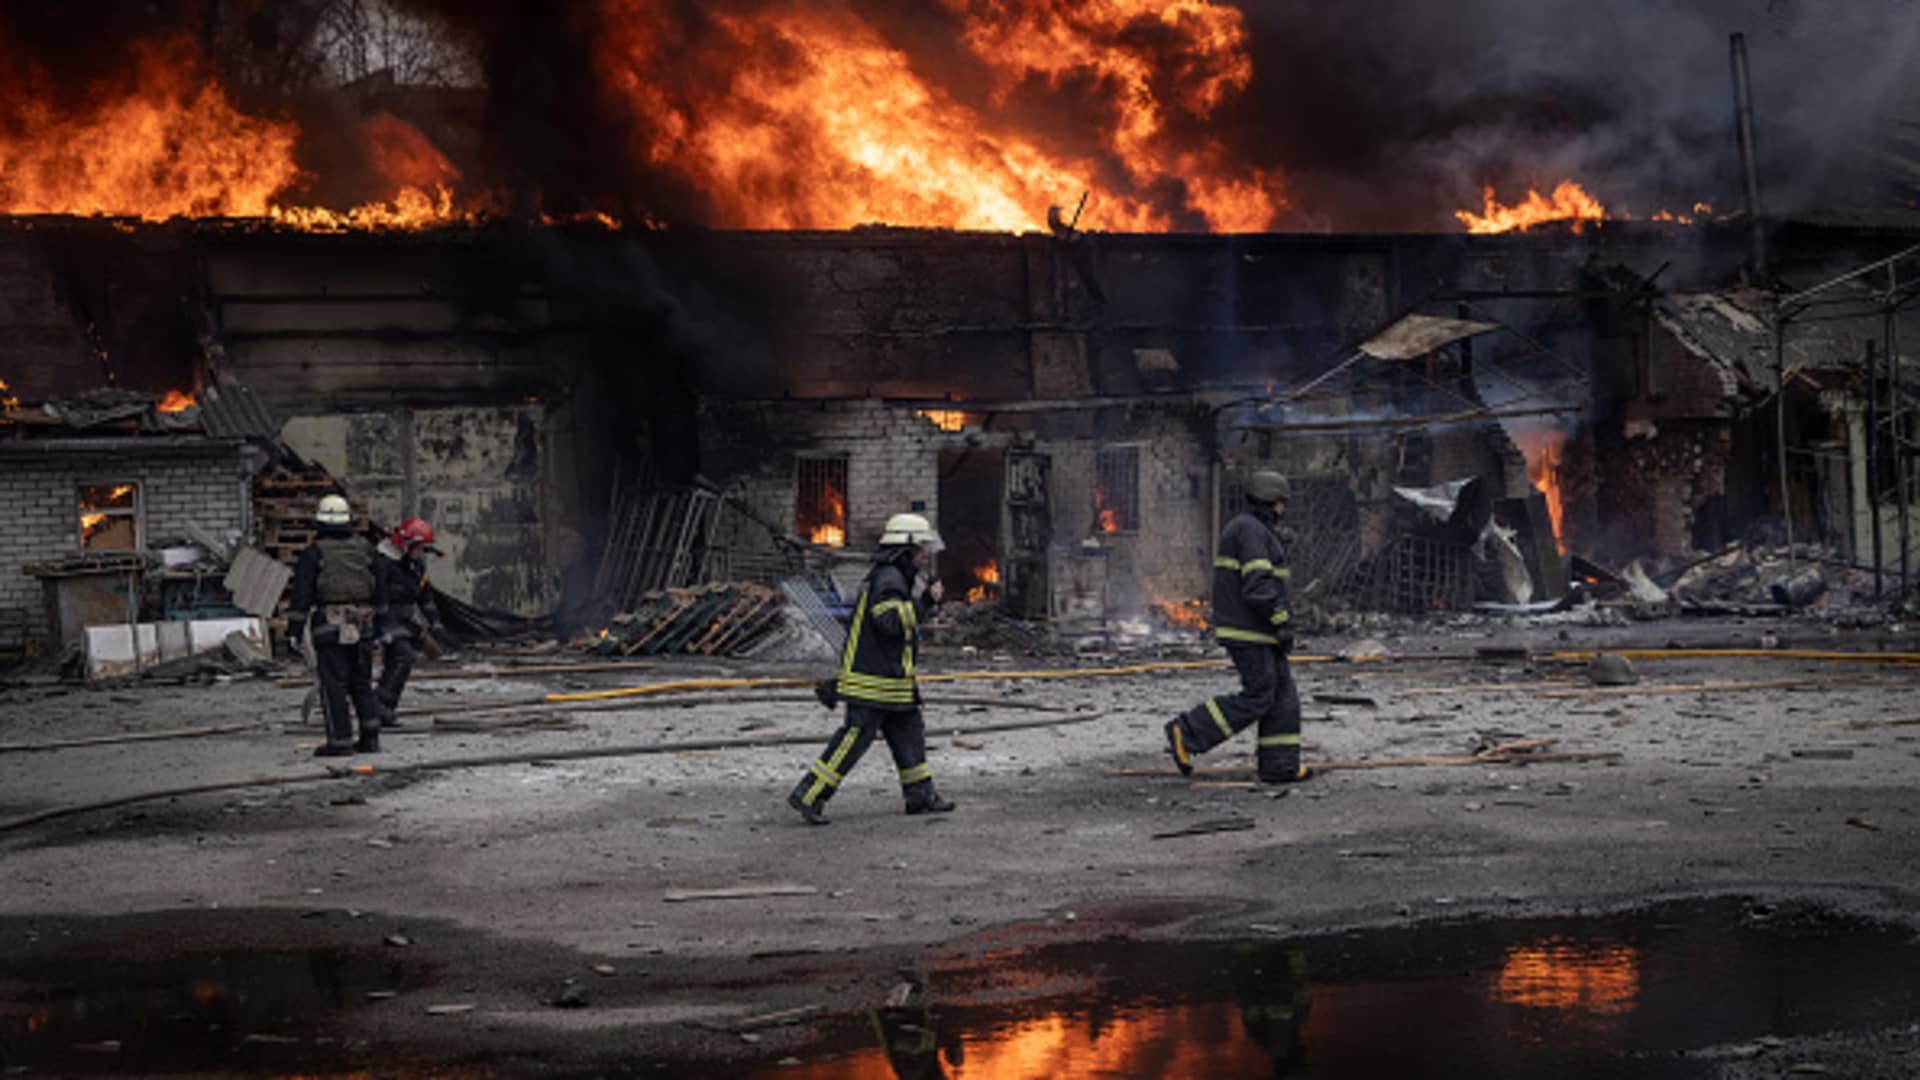 Firefighters work to extinguish a fire at a warehouse after it was hit by Russian shelling on March 28, 2022 in Kharkiv, Ukraine.